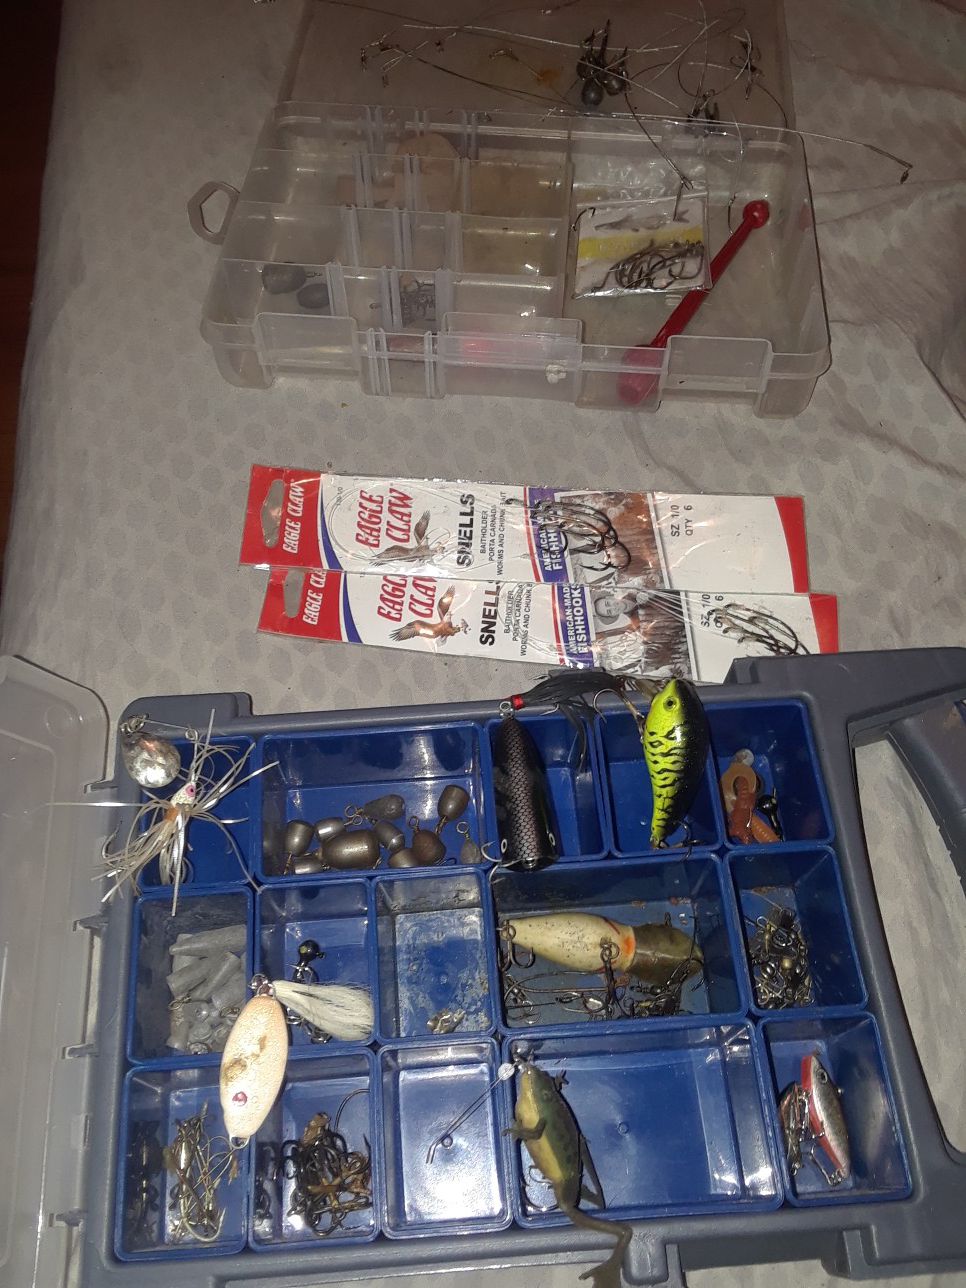 Fishing tackle lures, hooks, sinkers, ect.